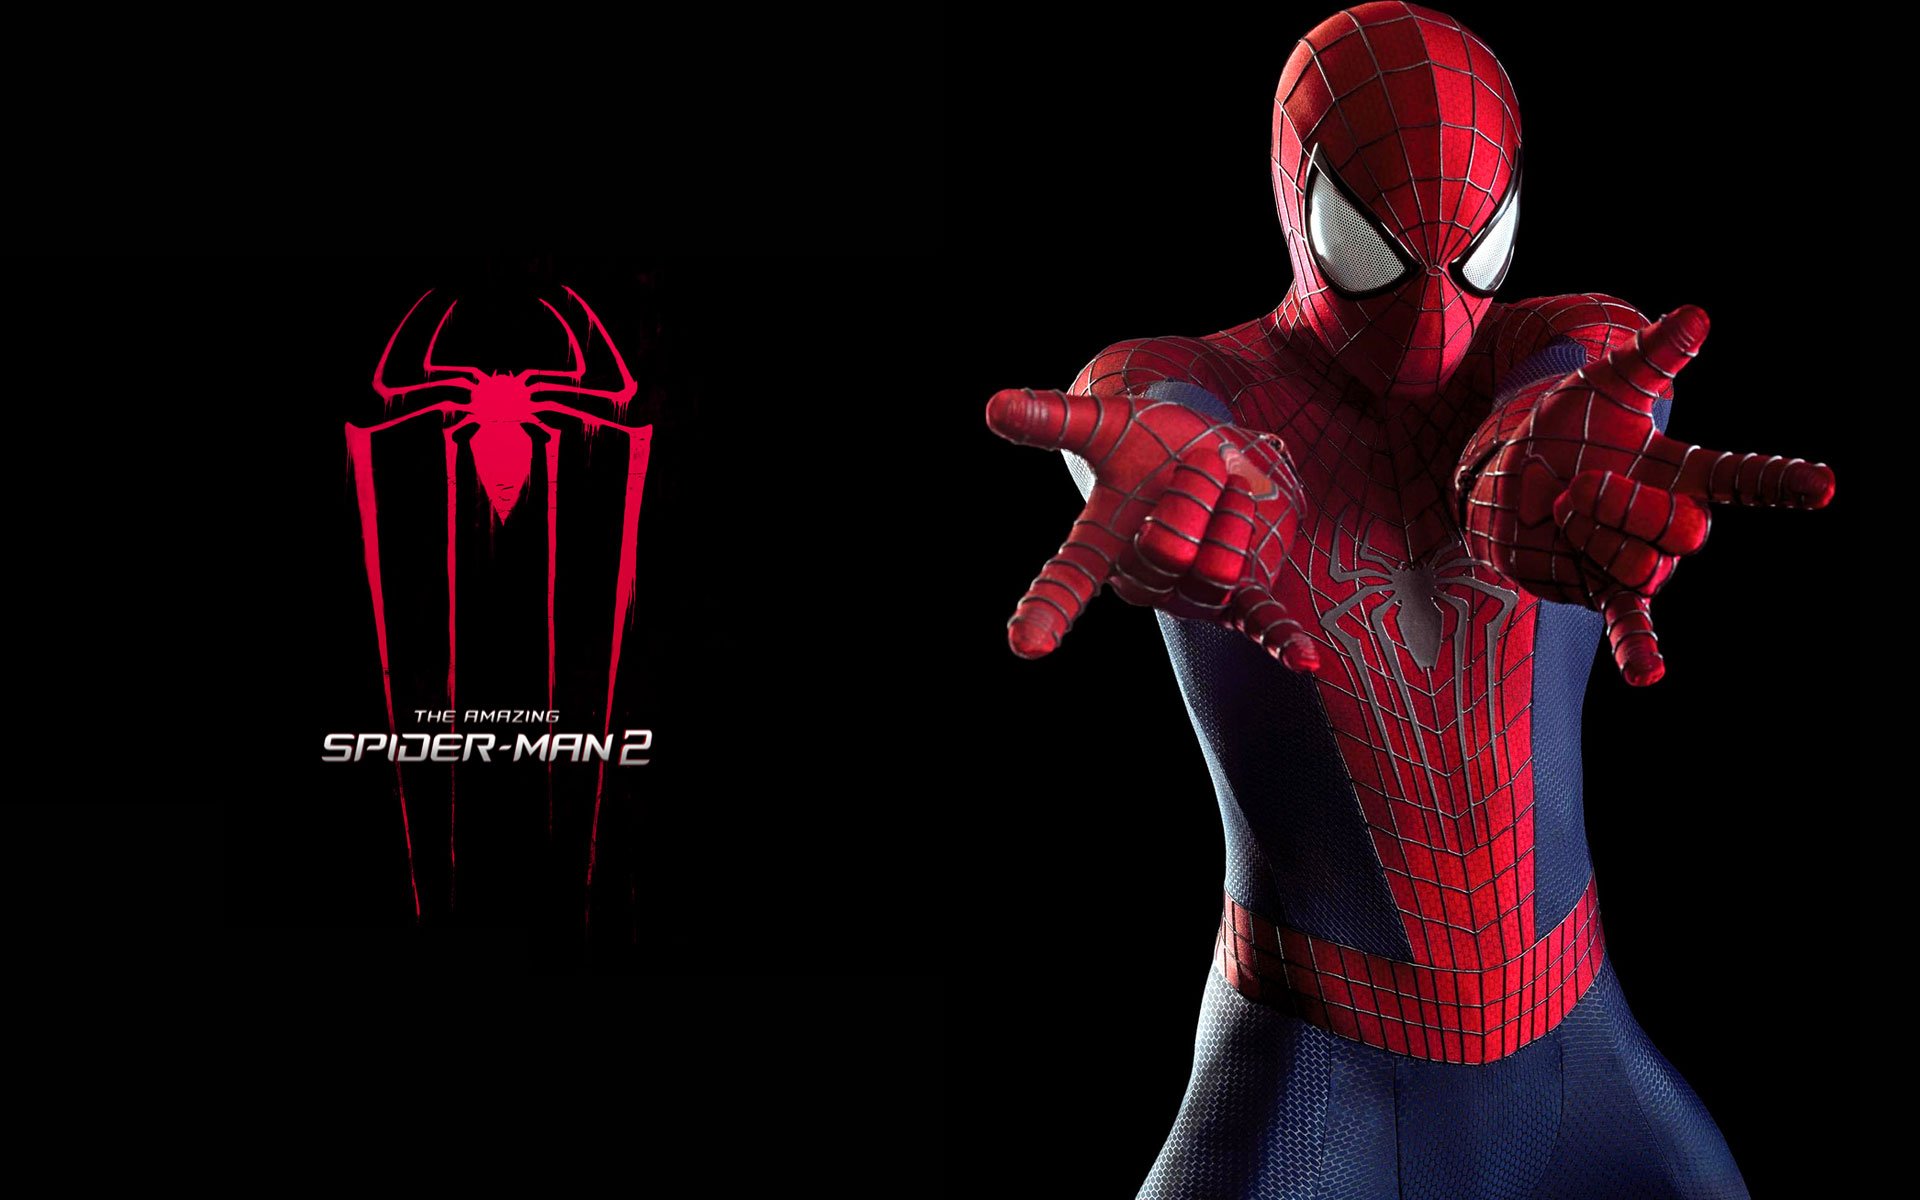 The Amazing Spider Man 2 Wallpapers [HD] Facebook Cover Photos 1920x1200